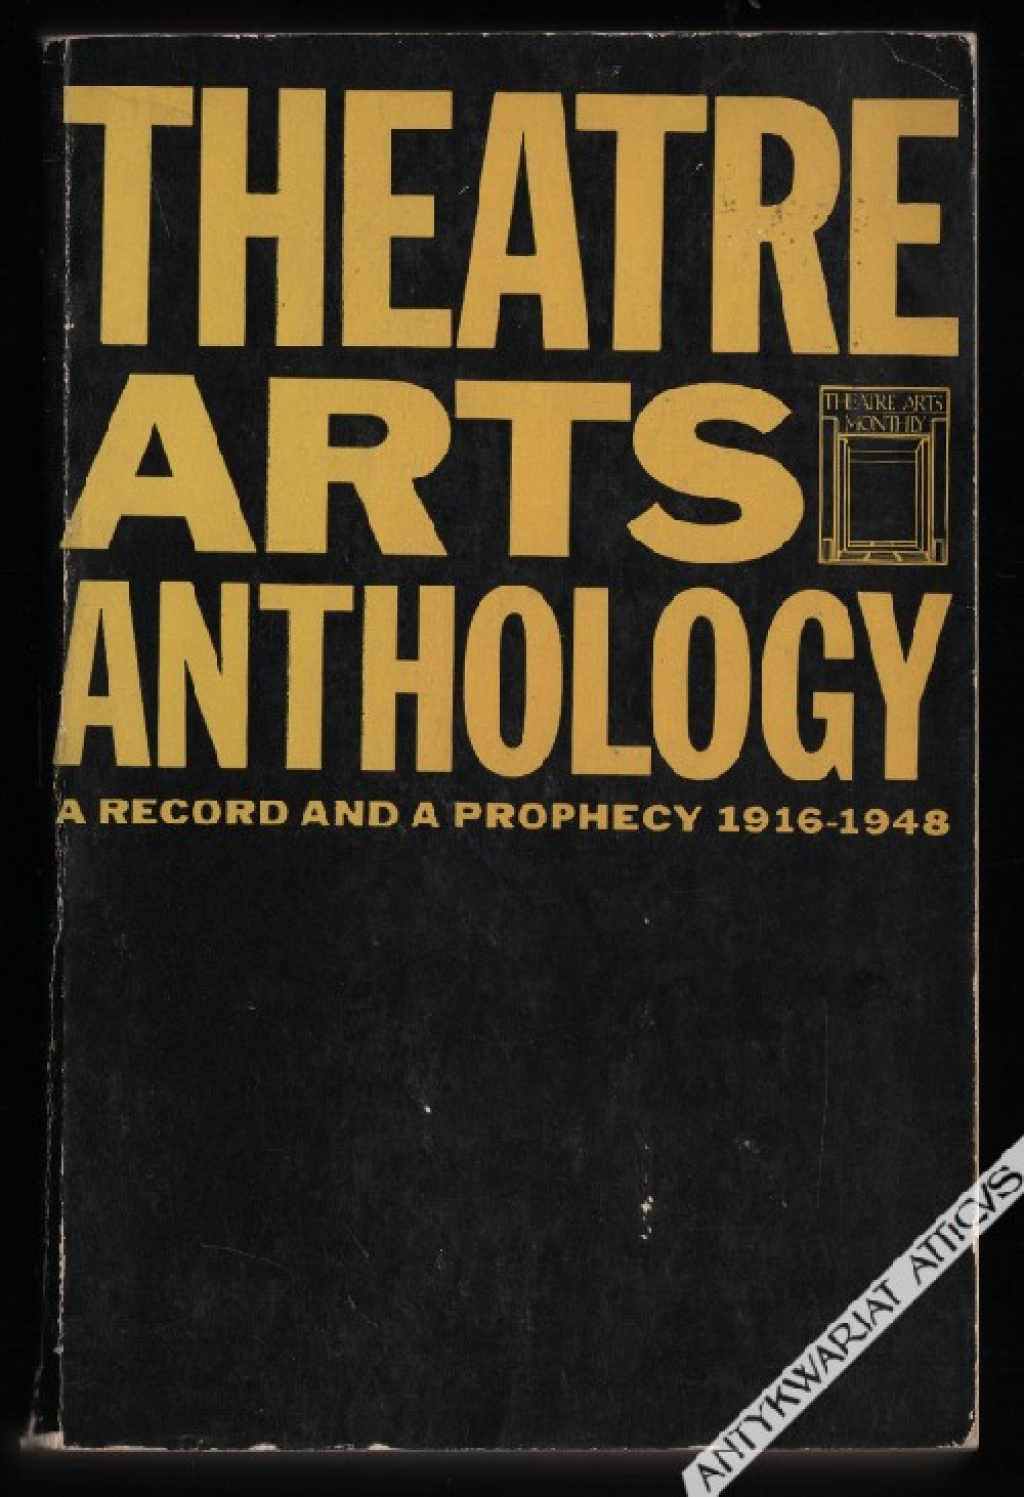 Theatre Arts Anthology. A record and a prophecy 1916-1948